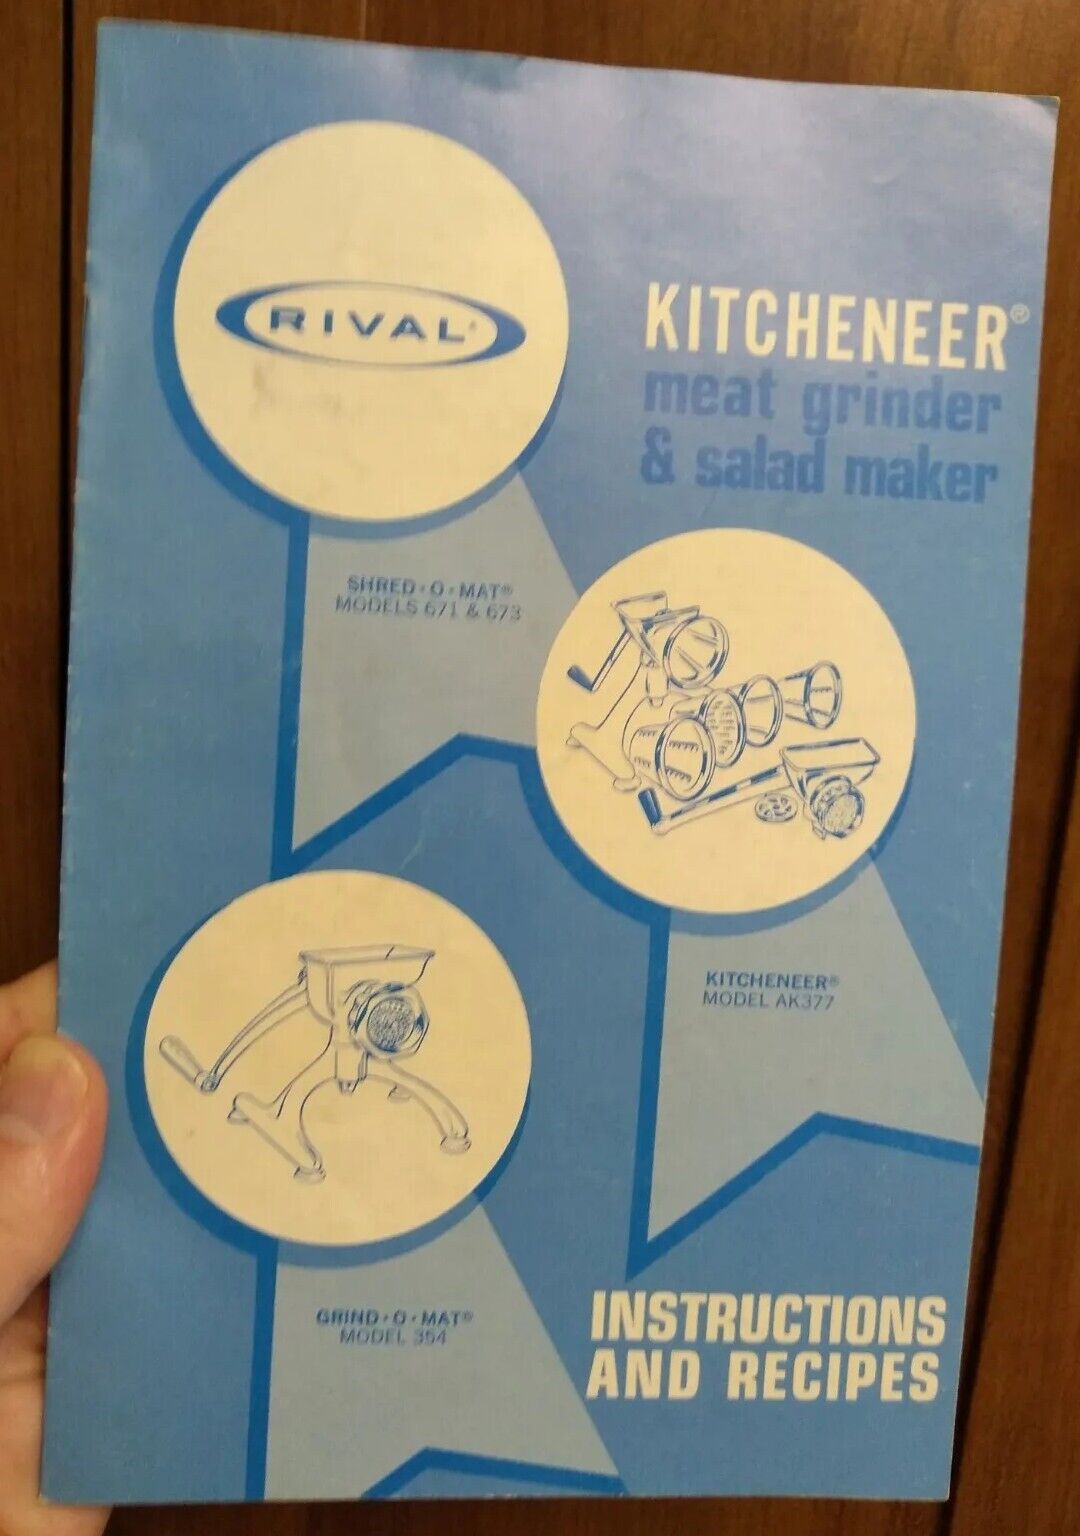 Rival Kitcheneer shred o mat models 671 & 673 Instructions and Recipes Booklet